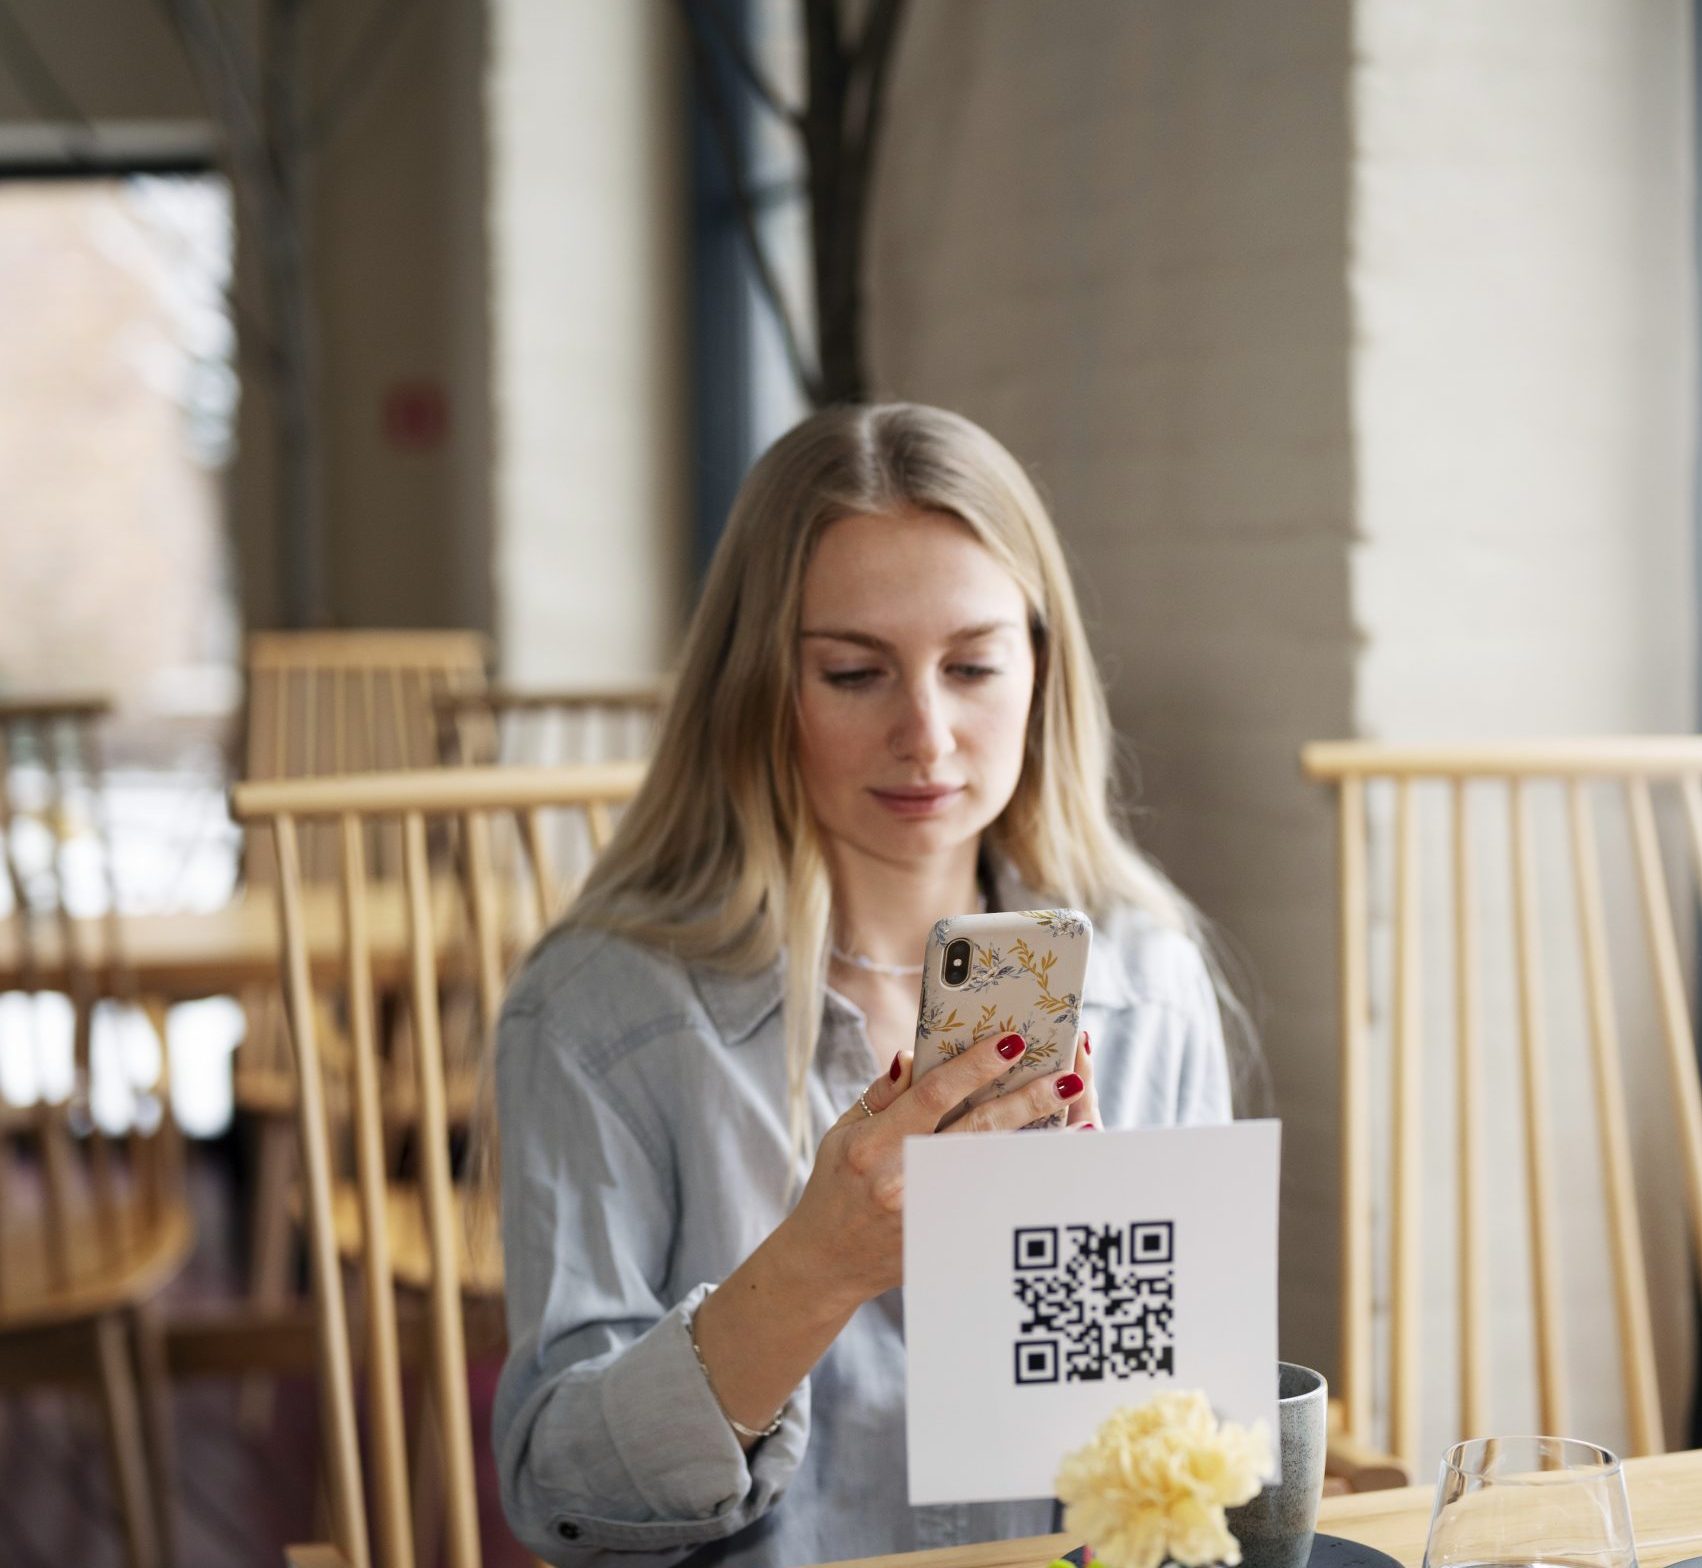 Woman scanning a qr code at the restaurant.